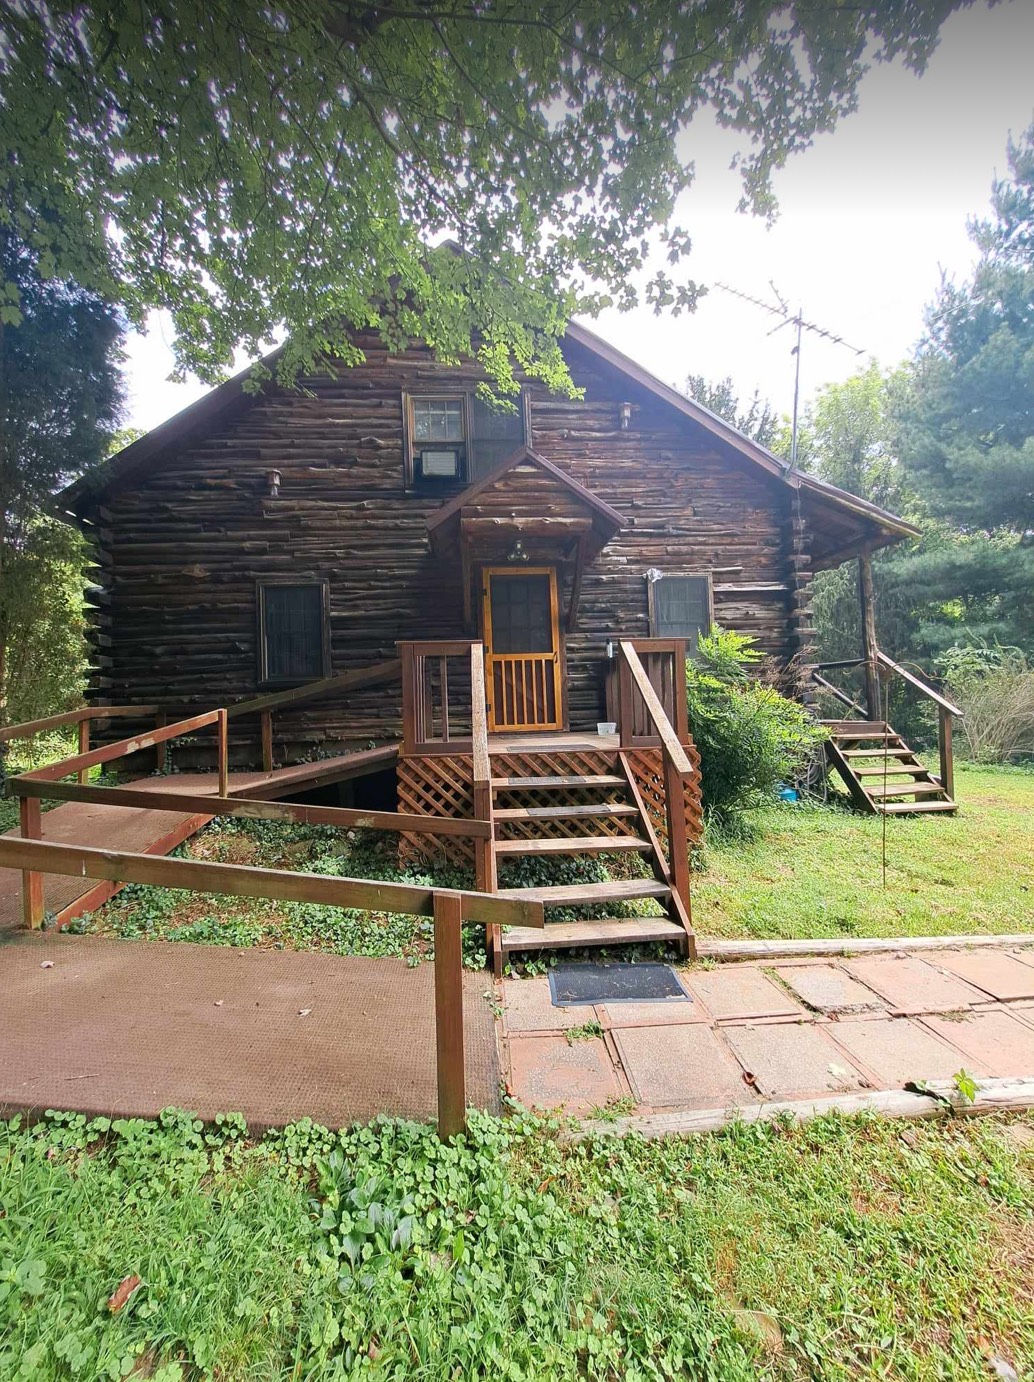 Charming Rustic Cabin on 2.27 acres with Private Location Near Town